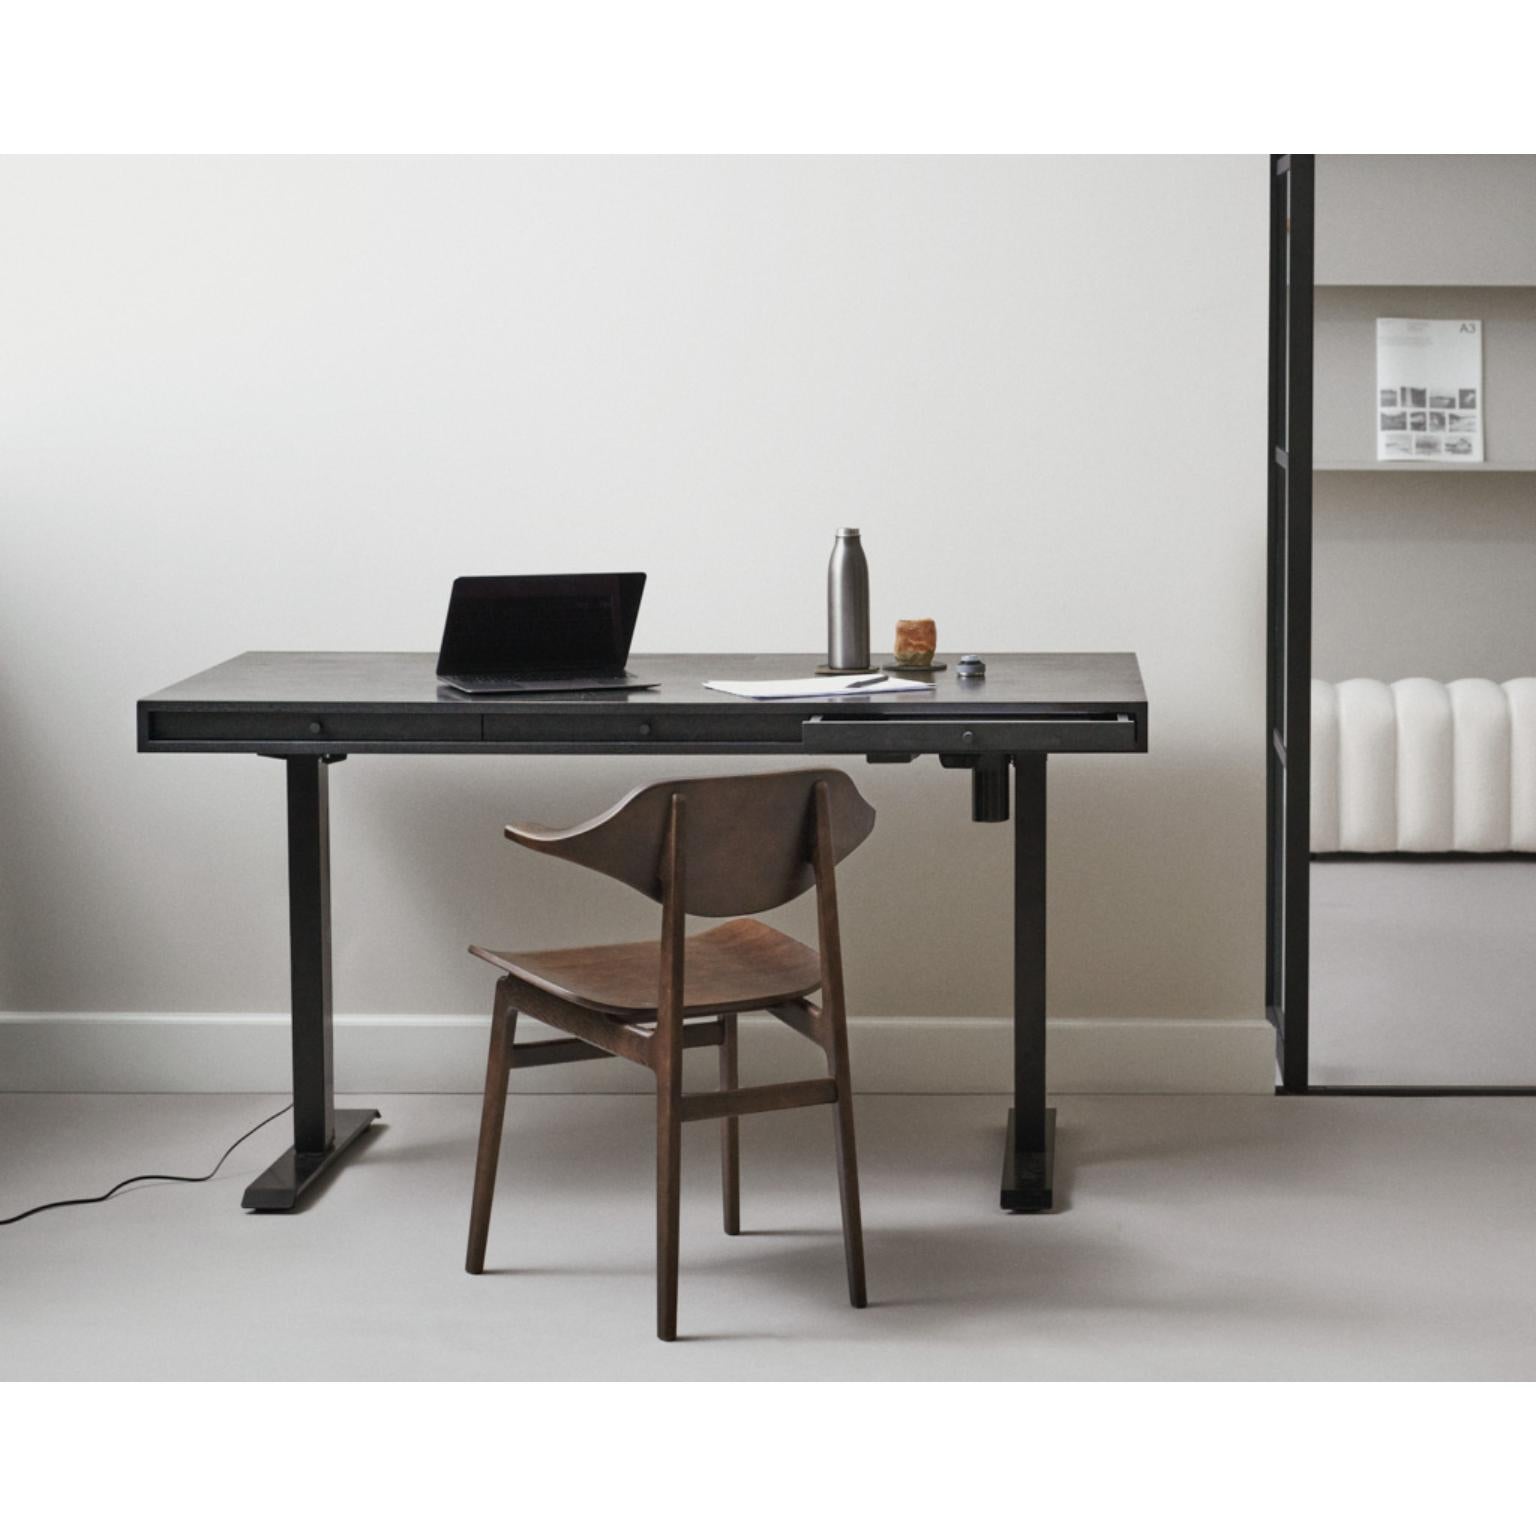 Powder-Coated JFK Home Desk With Adjustable Height Legs by NORR11